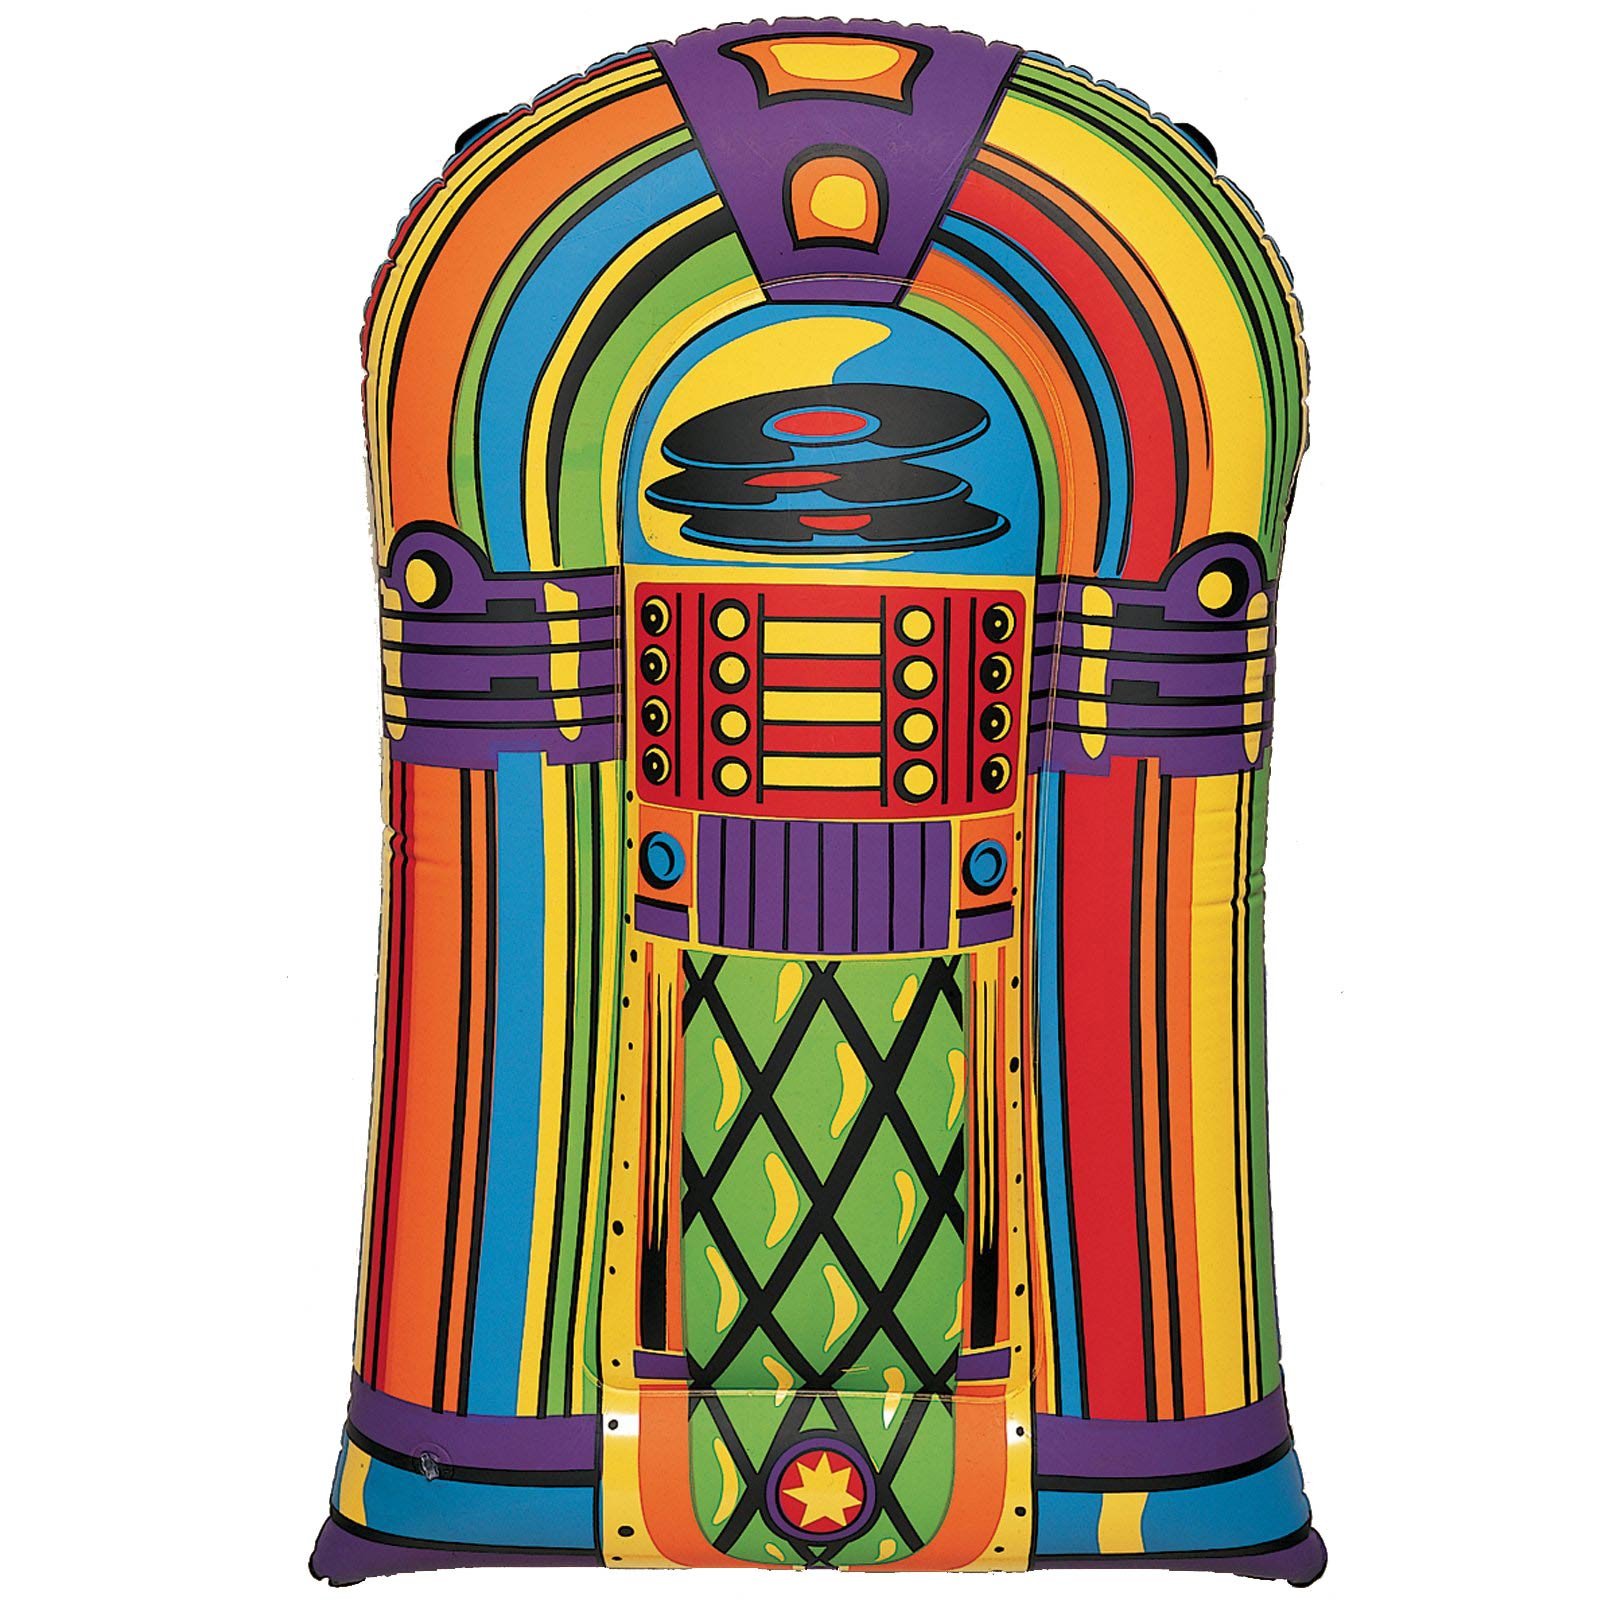 $13.46 Sock Hop Inflatable Jukebox at CostumesHut. - Clipart library 